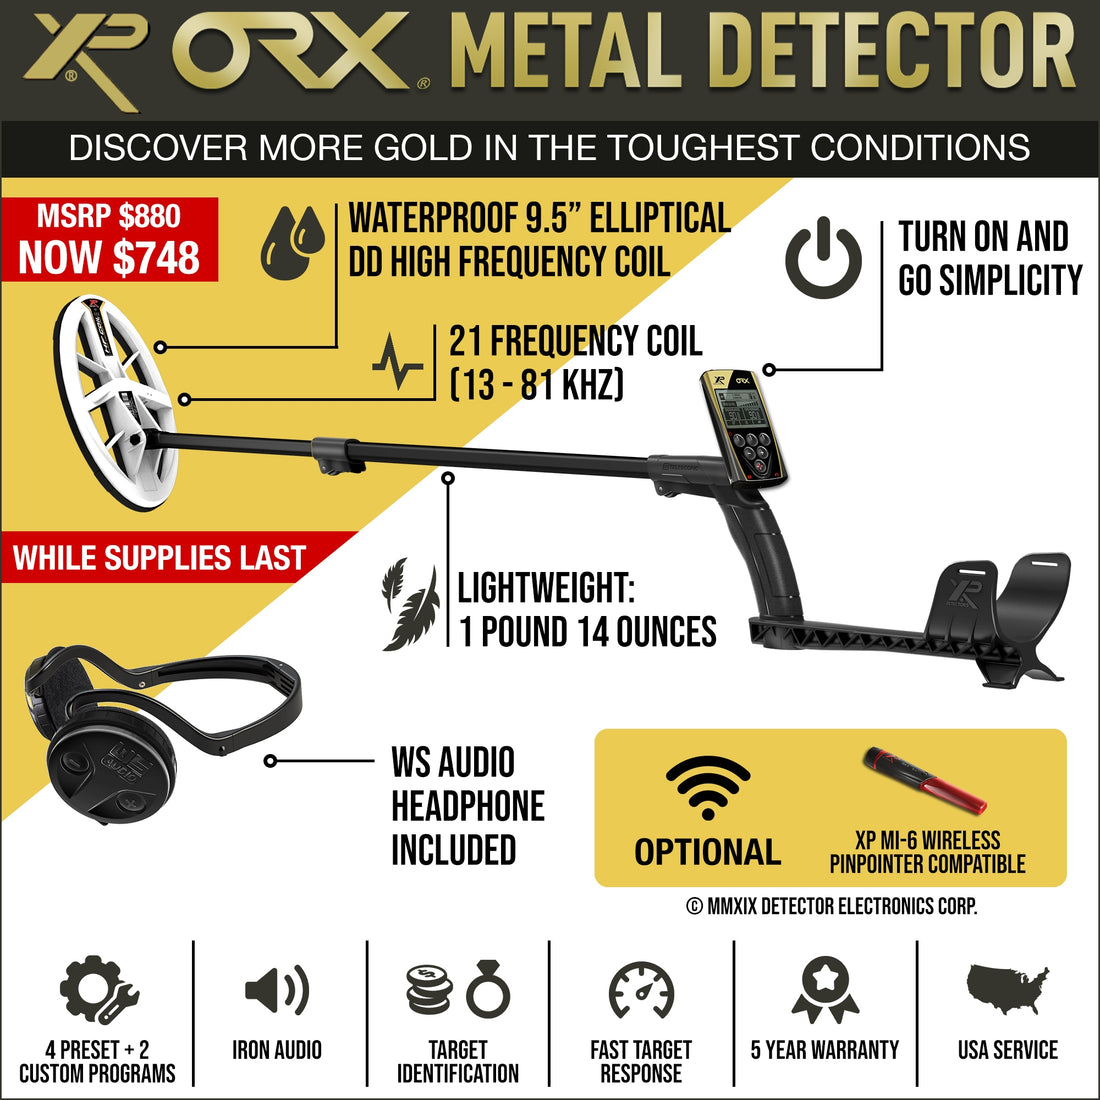 XP ORX Wireless Metal Detector with Back-lit Display + WSAudio Wireless Headphone + 9.5" Elliptical DD High Frequency Waterproof Coil